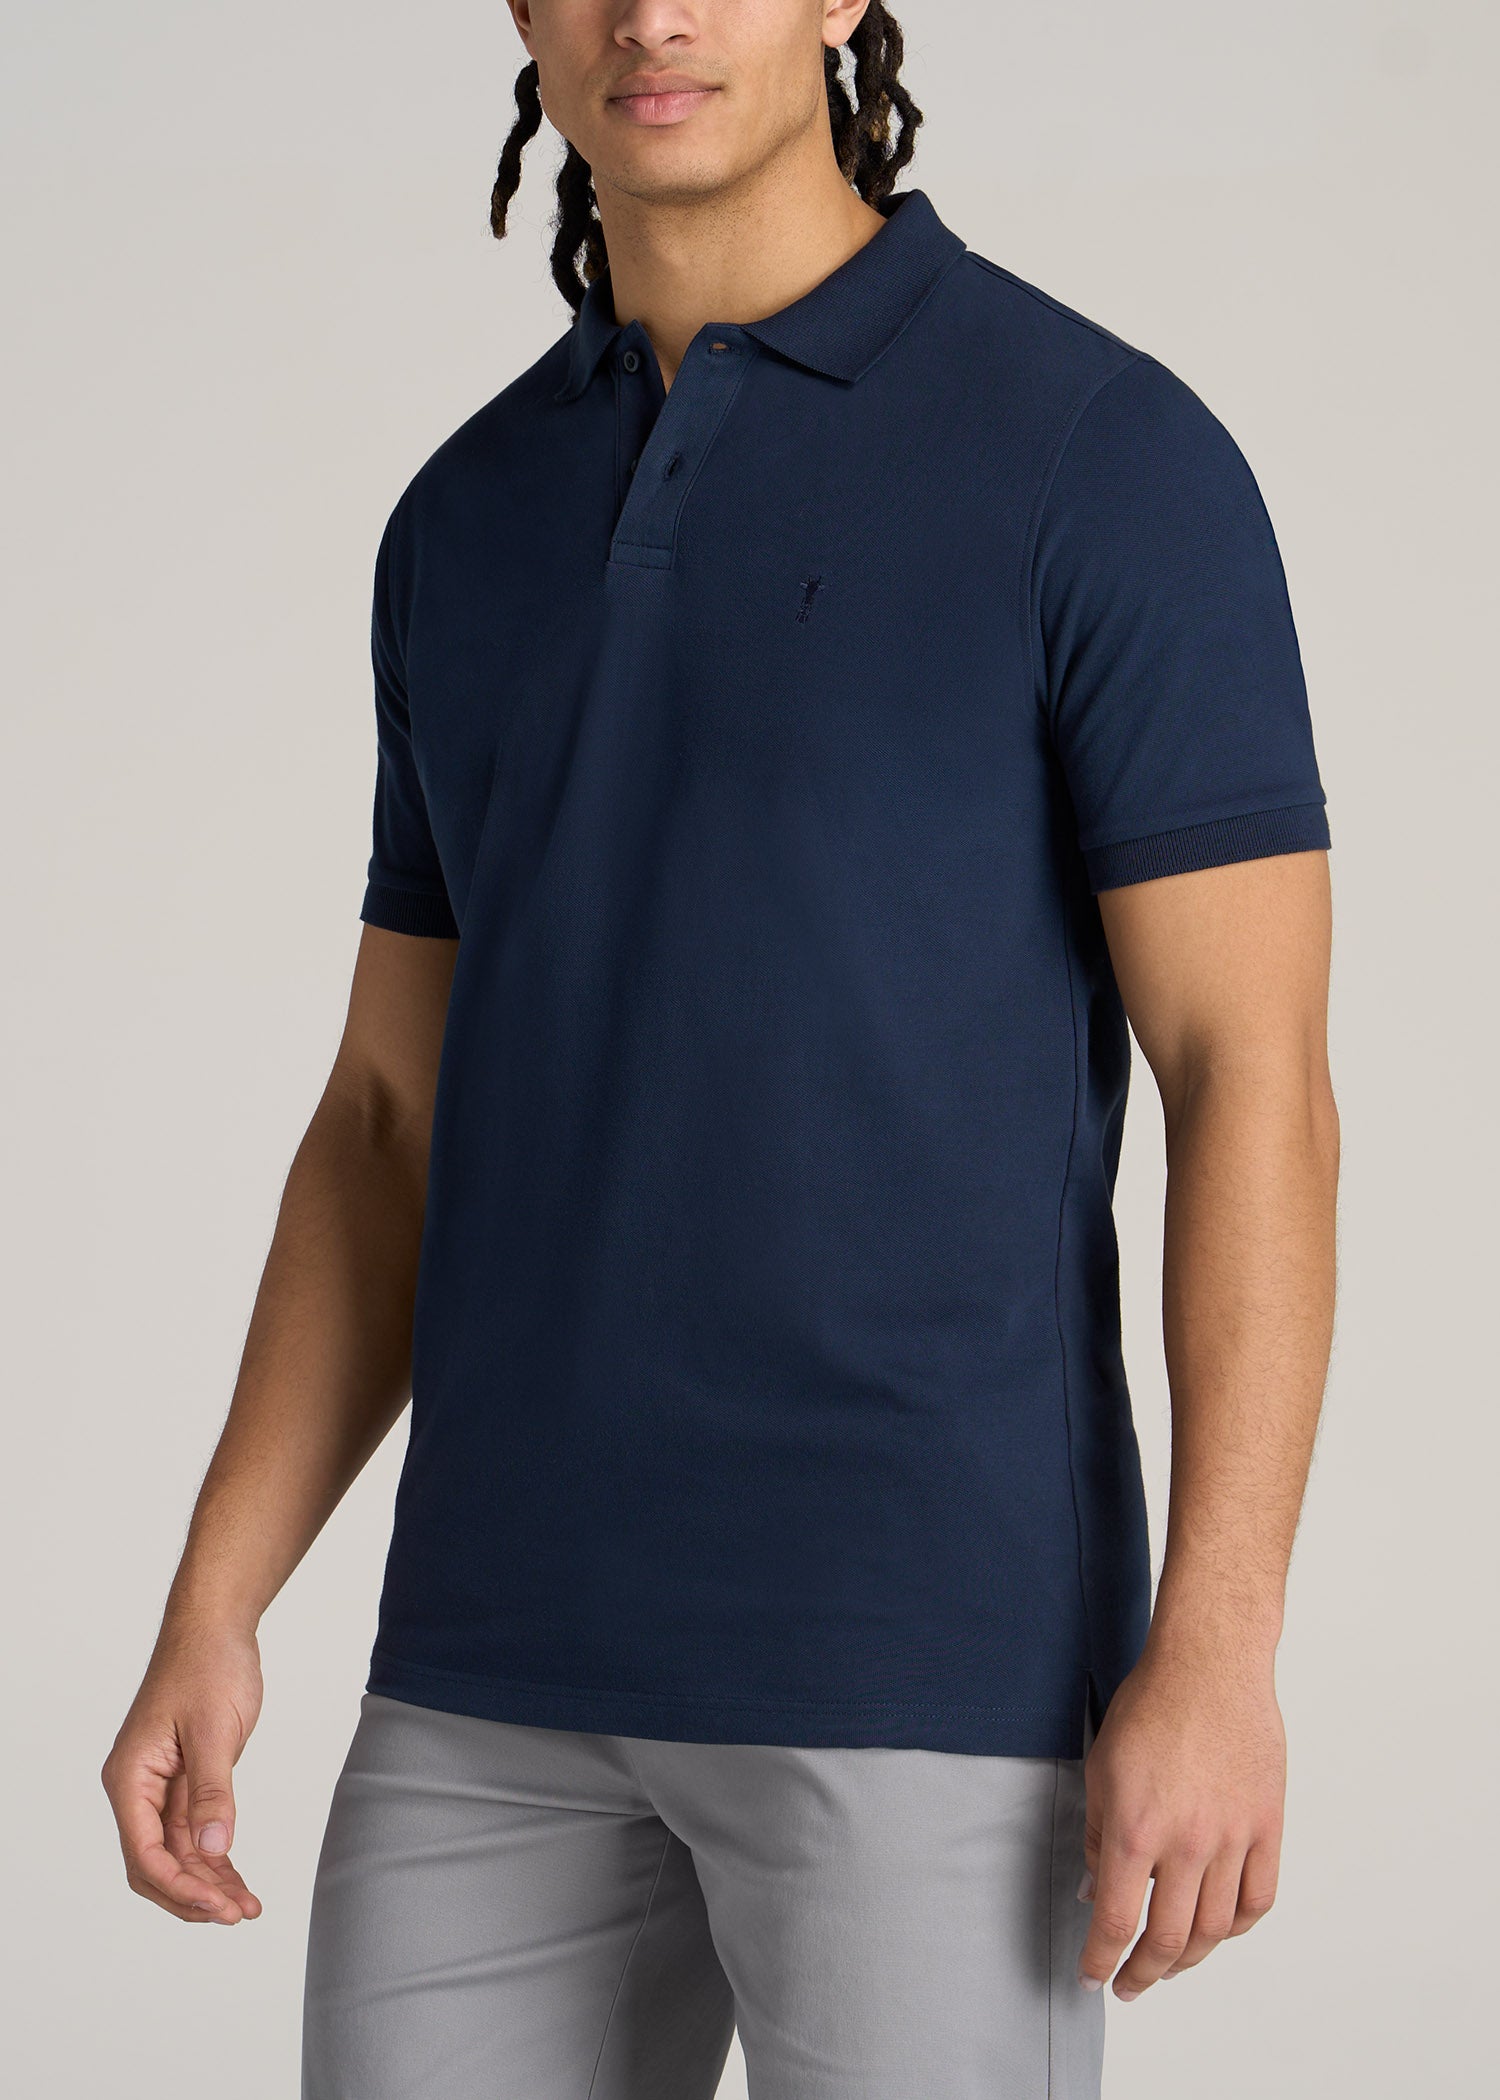 Tall Men's Polo Shirt With Embroidered Logo Marine Navy | American Tall